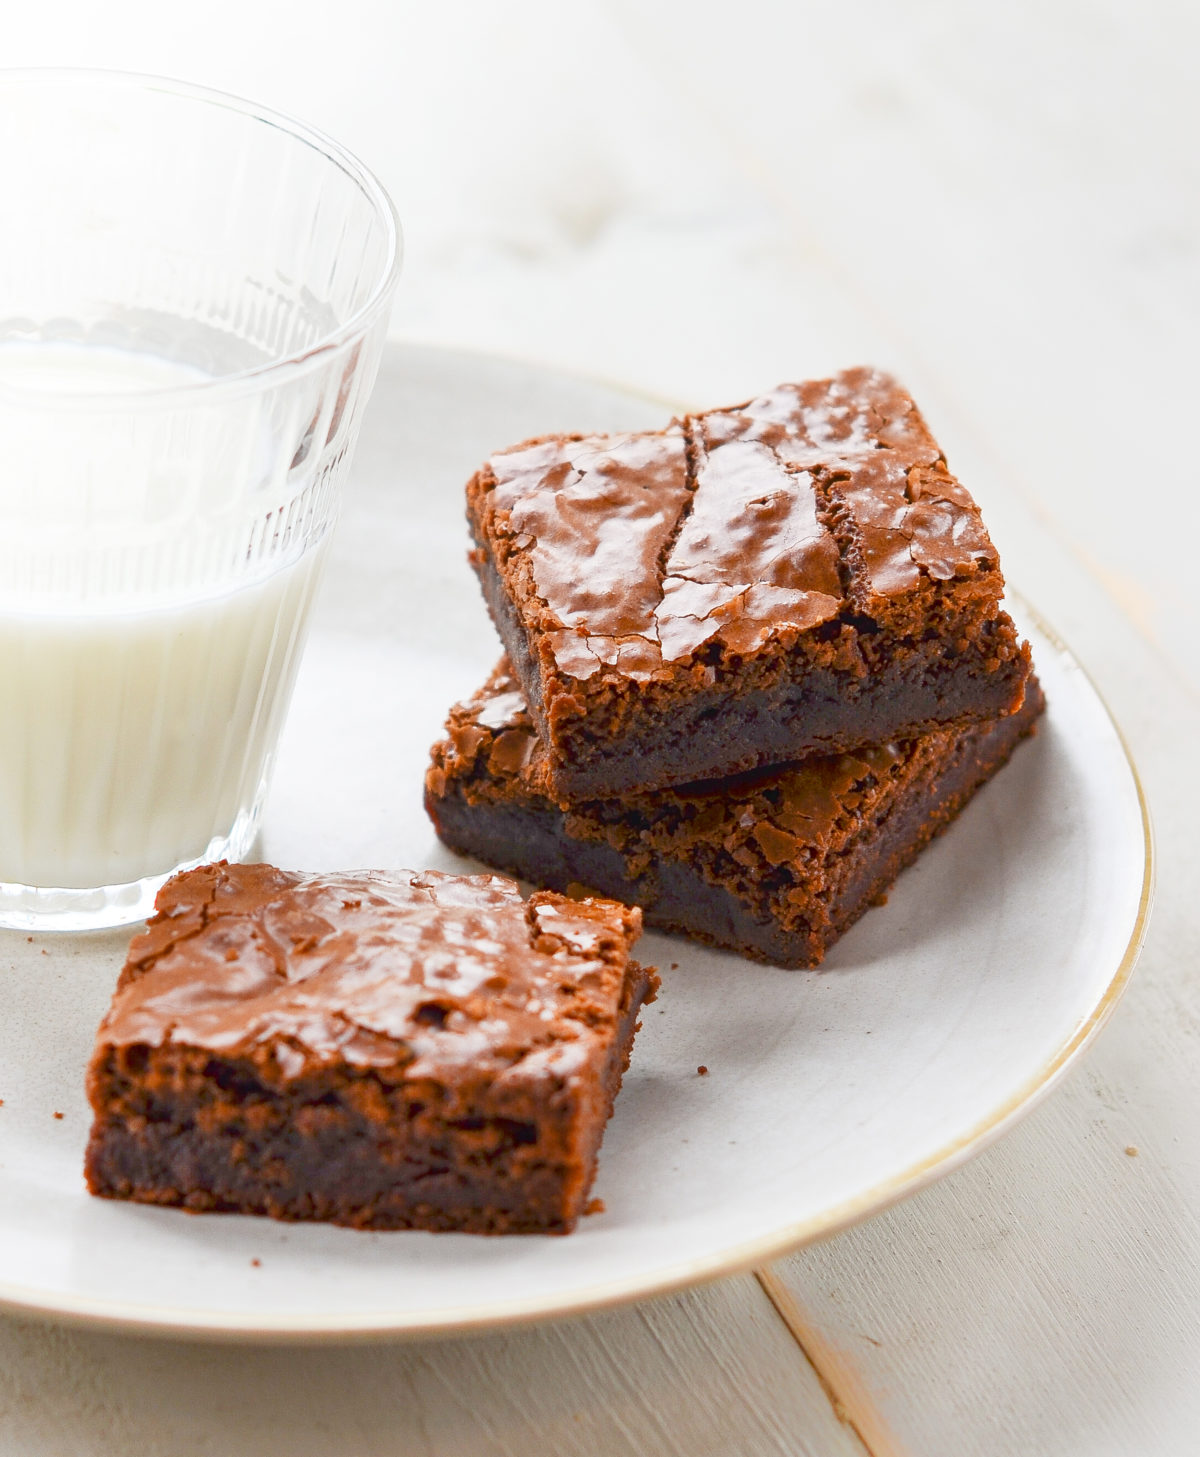 Three brownies on a plate with a glass of milk.